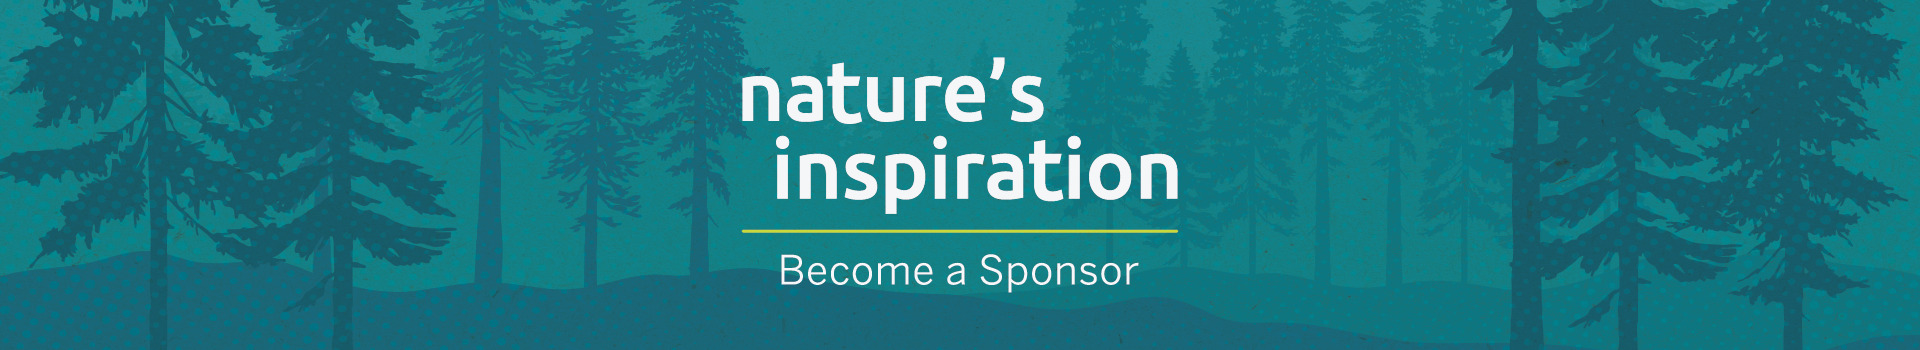 Banner saying "Nature's Inspiration, Become a Sponsor"